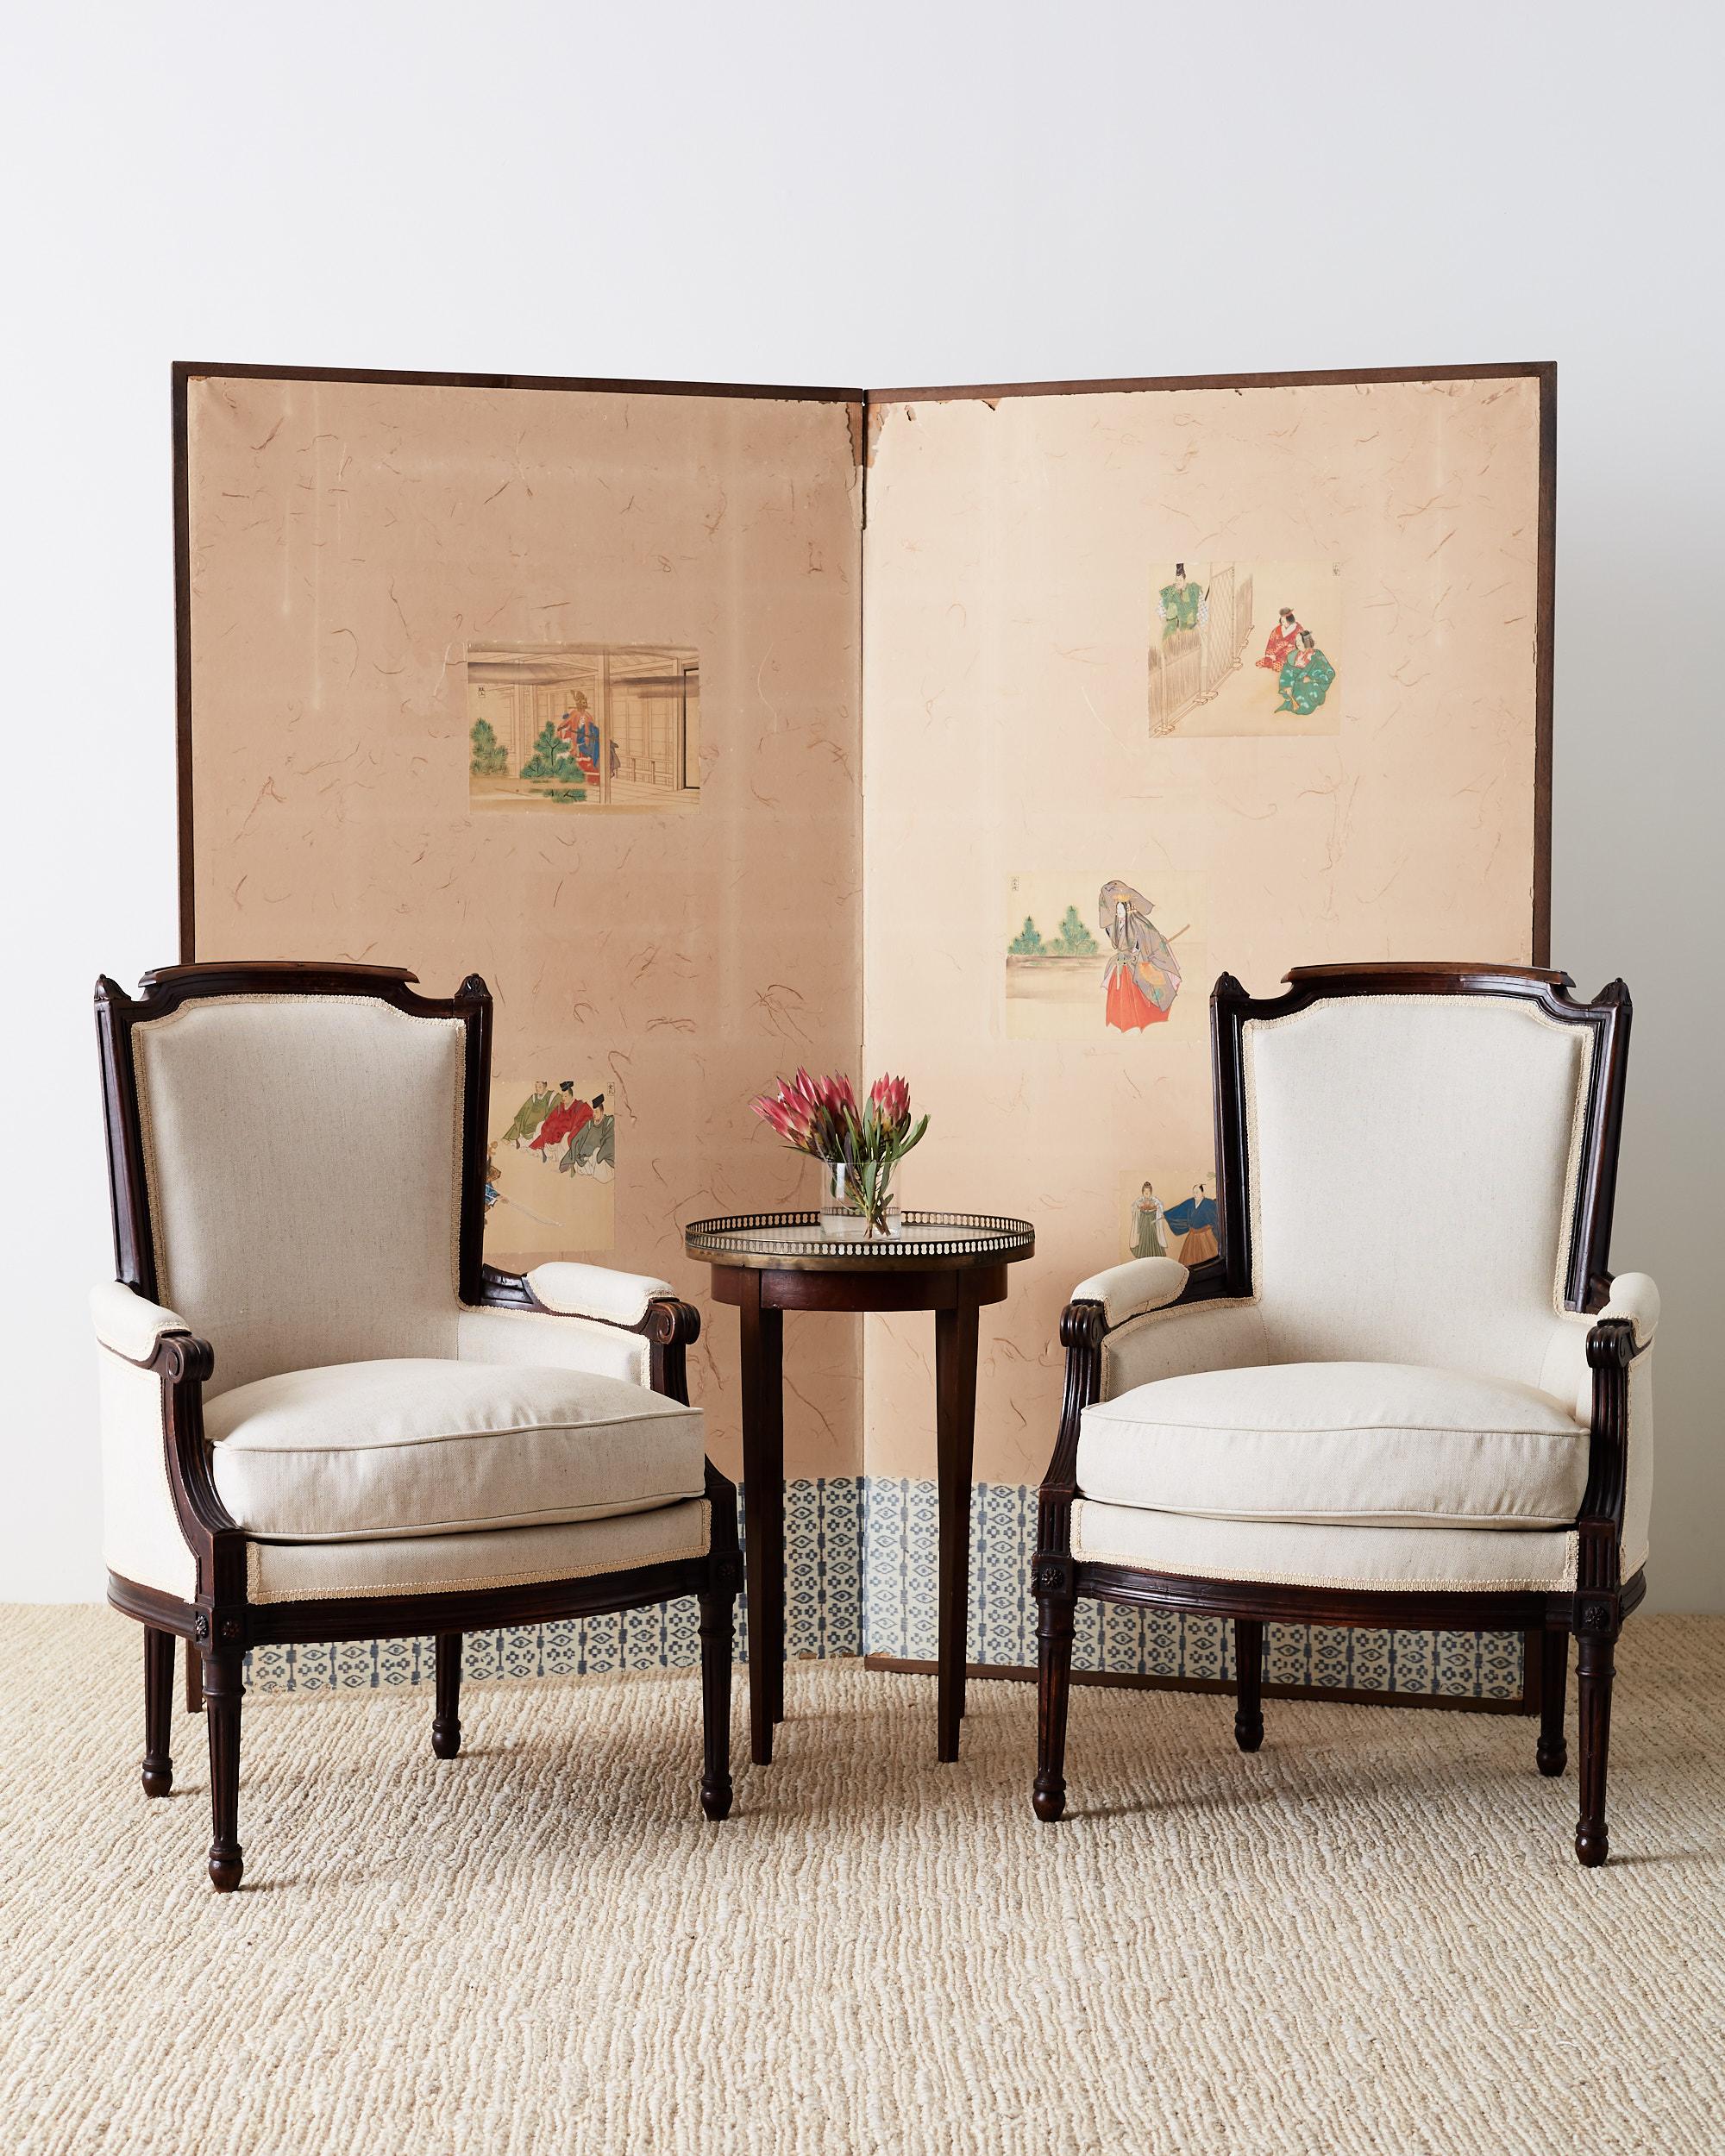 Restored pair of Maison Jansen walnut bergères made in the French Louis XVI neoclassical style featuring new French linen upholstery. These chairs are stunning with cream colored linen with a lovely texture that showcases the dark walnut frames. The